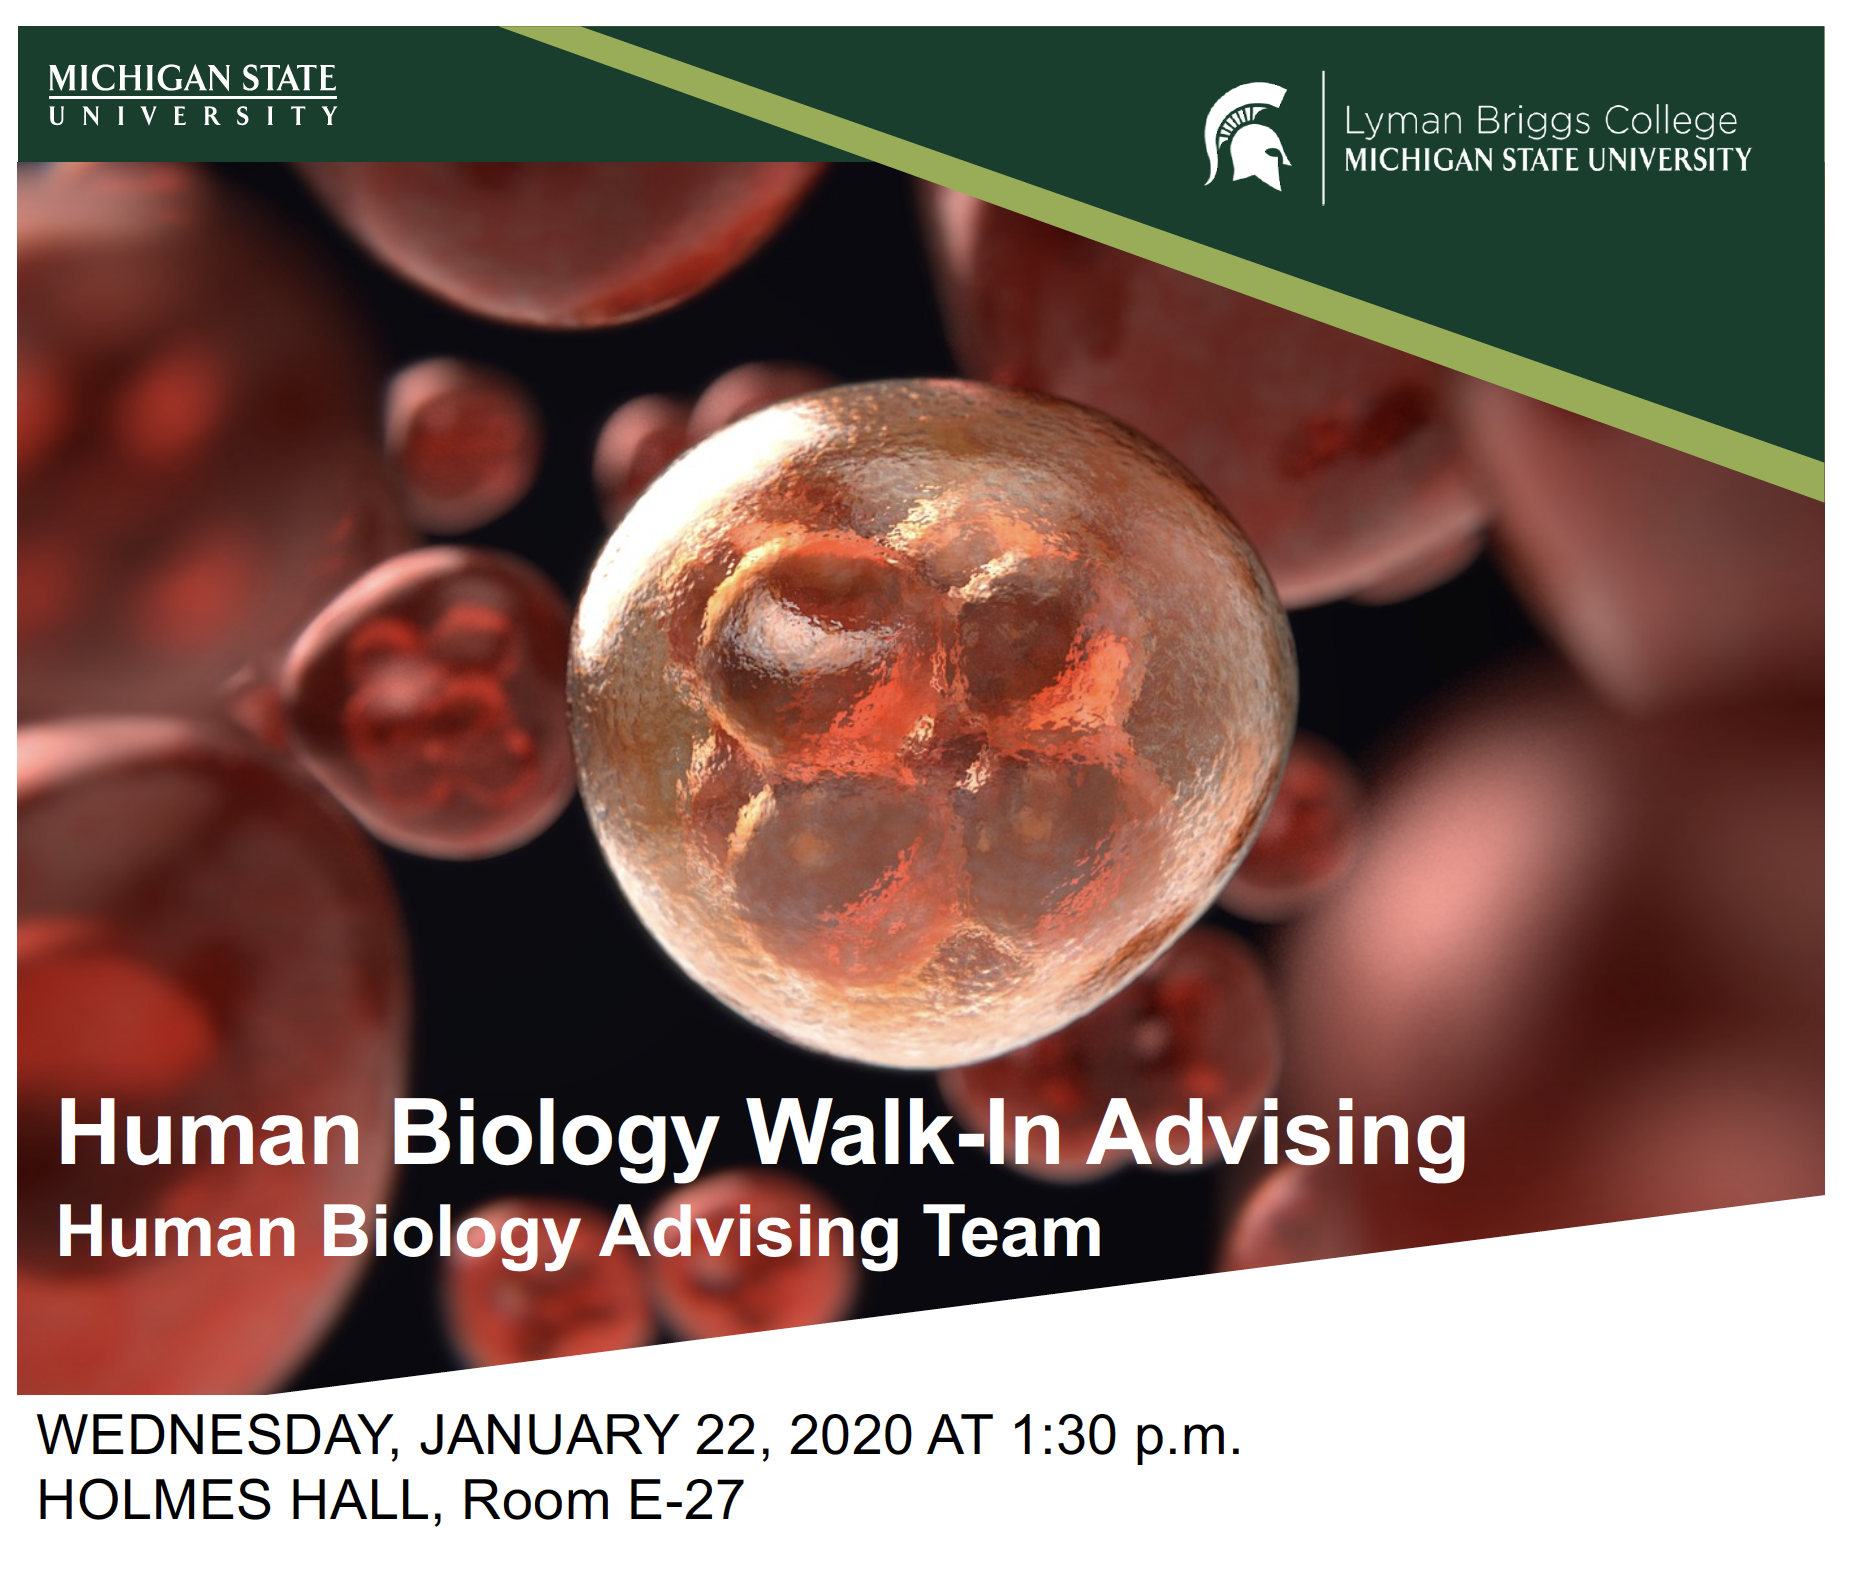 Cell meiosis Human Biology Walk-in Advising Wednesday, Jan. 22, 201020 at 1:30 p.m.